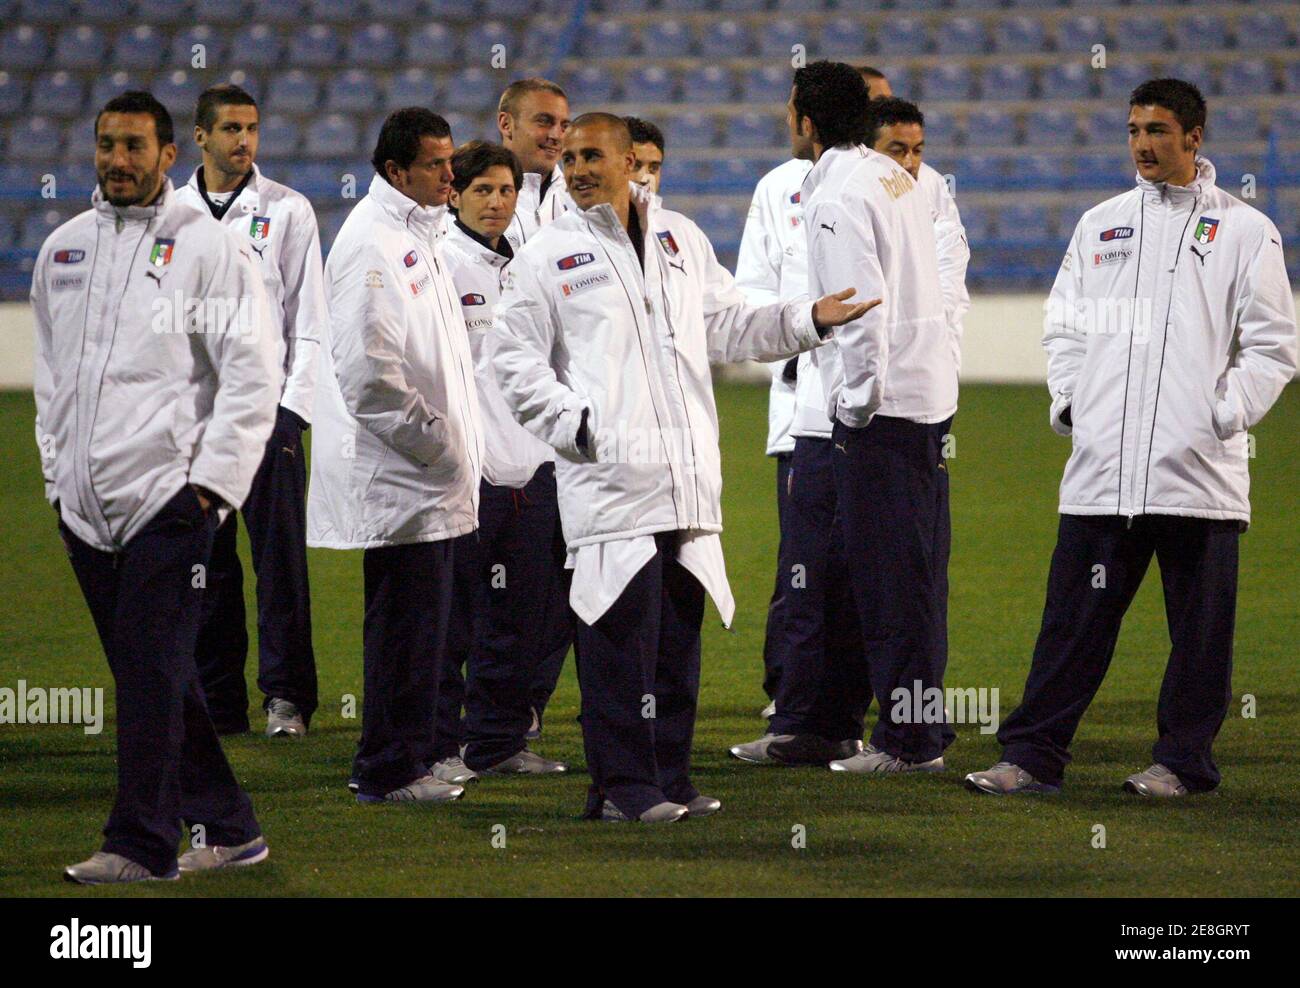 Italy's soccer players attend a training session in Podgorica March 27, 2009. Italy will play their 2010 World Cup qualifying soccer match against Montenegro on Saturday.  REUTERS/Ivan Milutinovic (MONTENEGRO SPORT SOCCER) Stock Photo